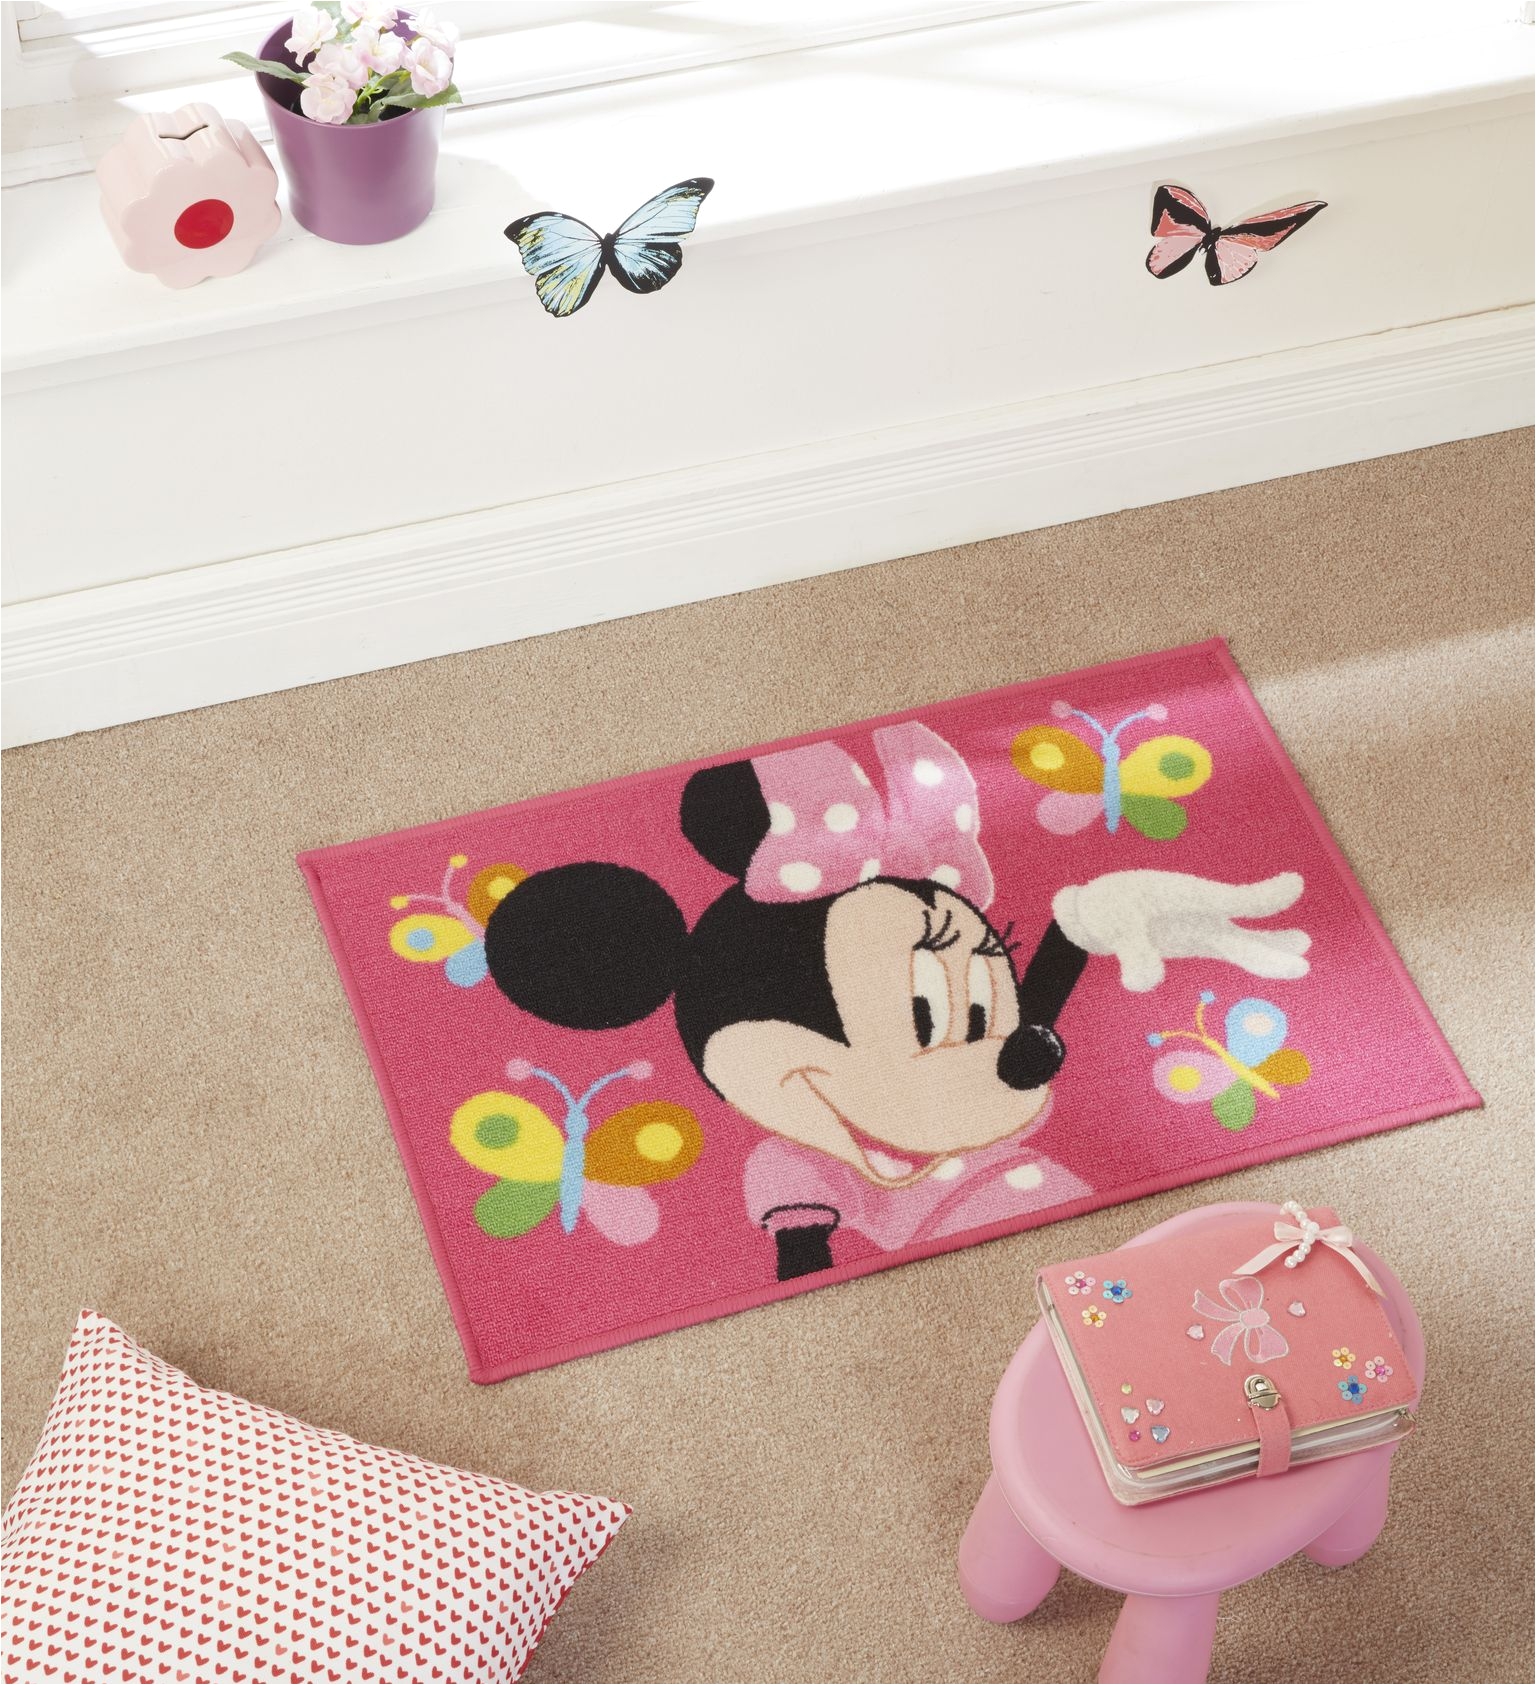 design inspird by famous cartoon character minni this kids rug is sure to